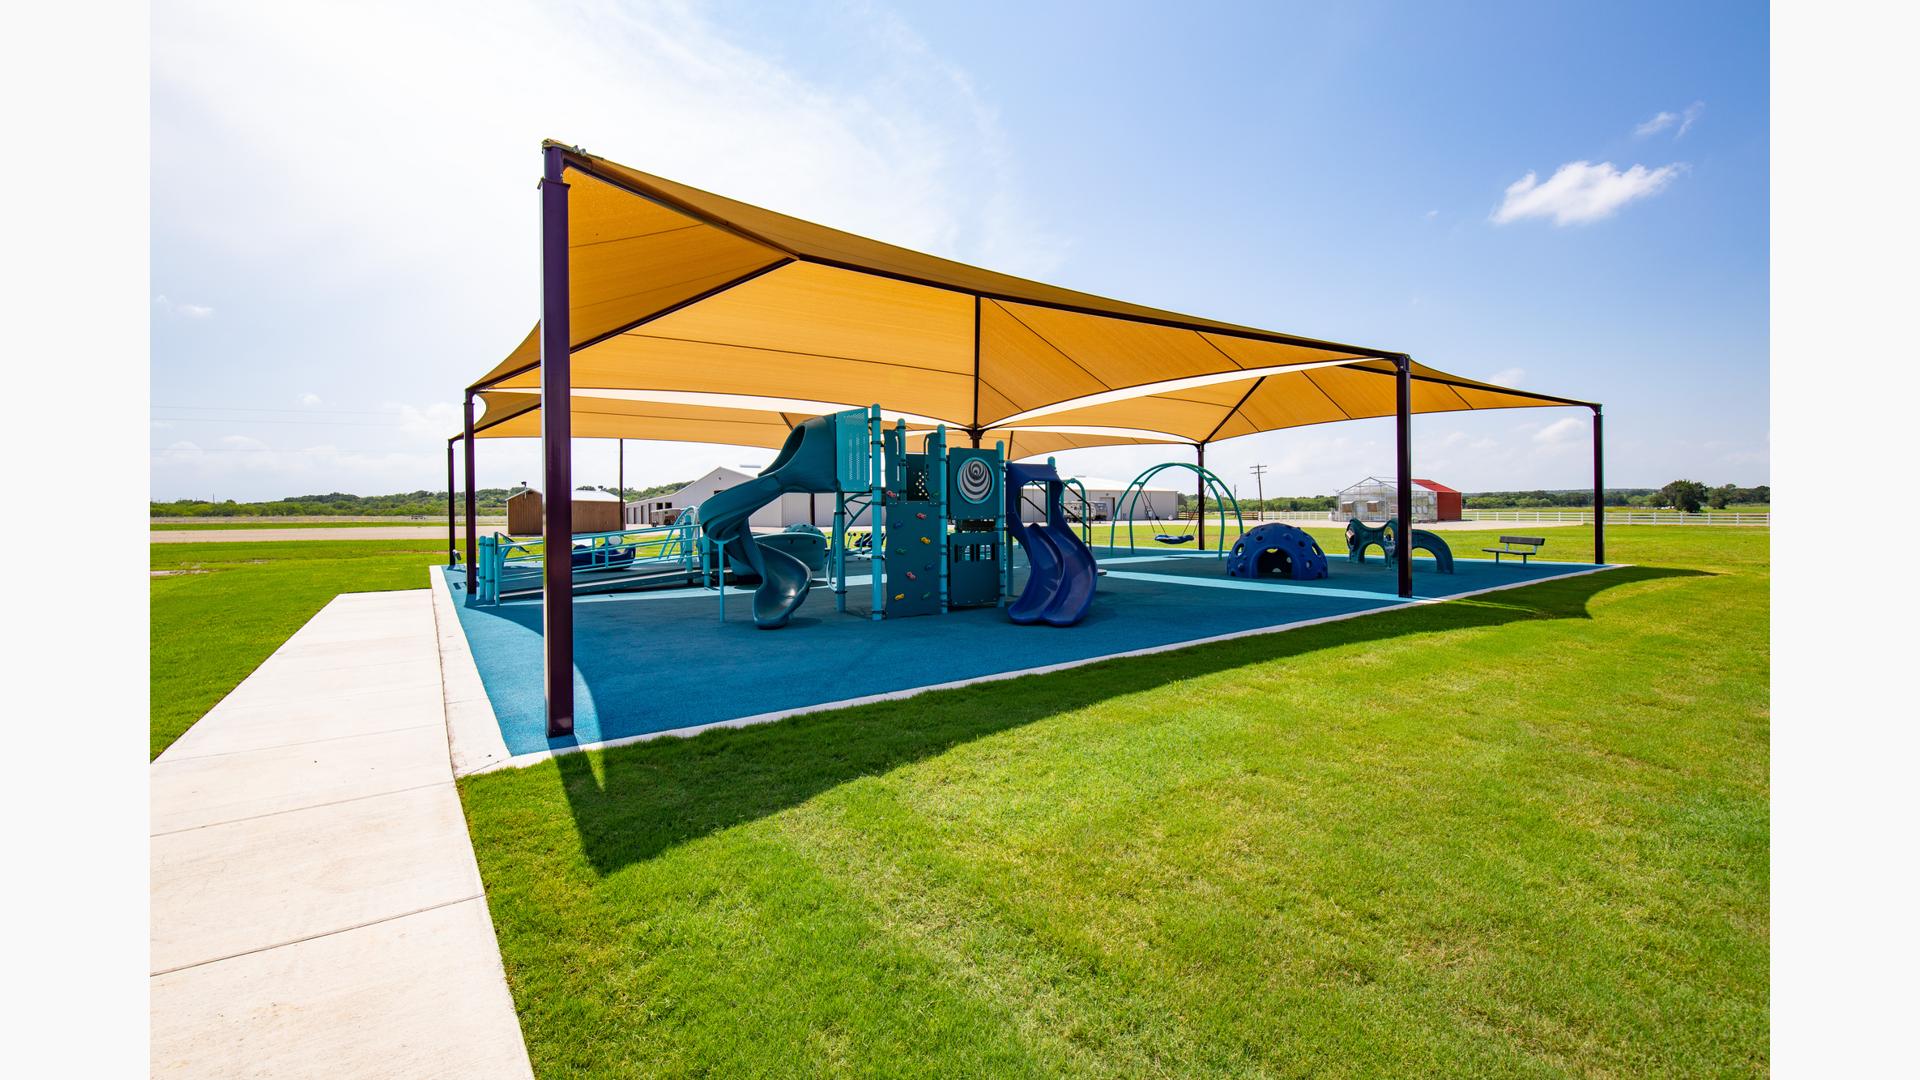 A PlayBooster playground packed with plenty of freestanding play activities as well as inclusive one such as Rhapsody® outdoor musical instruments, OmniSpin® spinner, and Cozy Dome®. All covered by SkyWays® commercial shade sails.